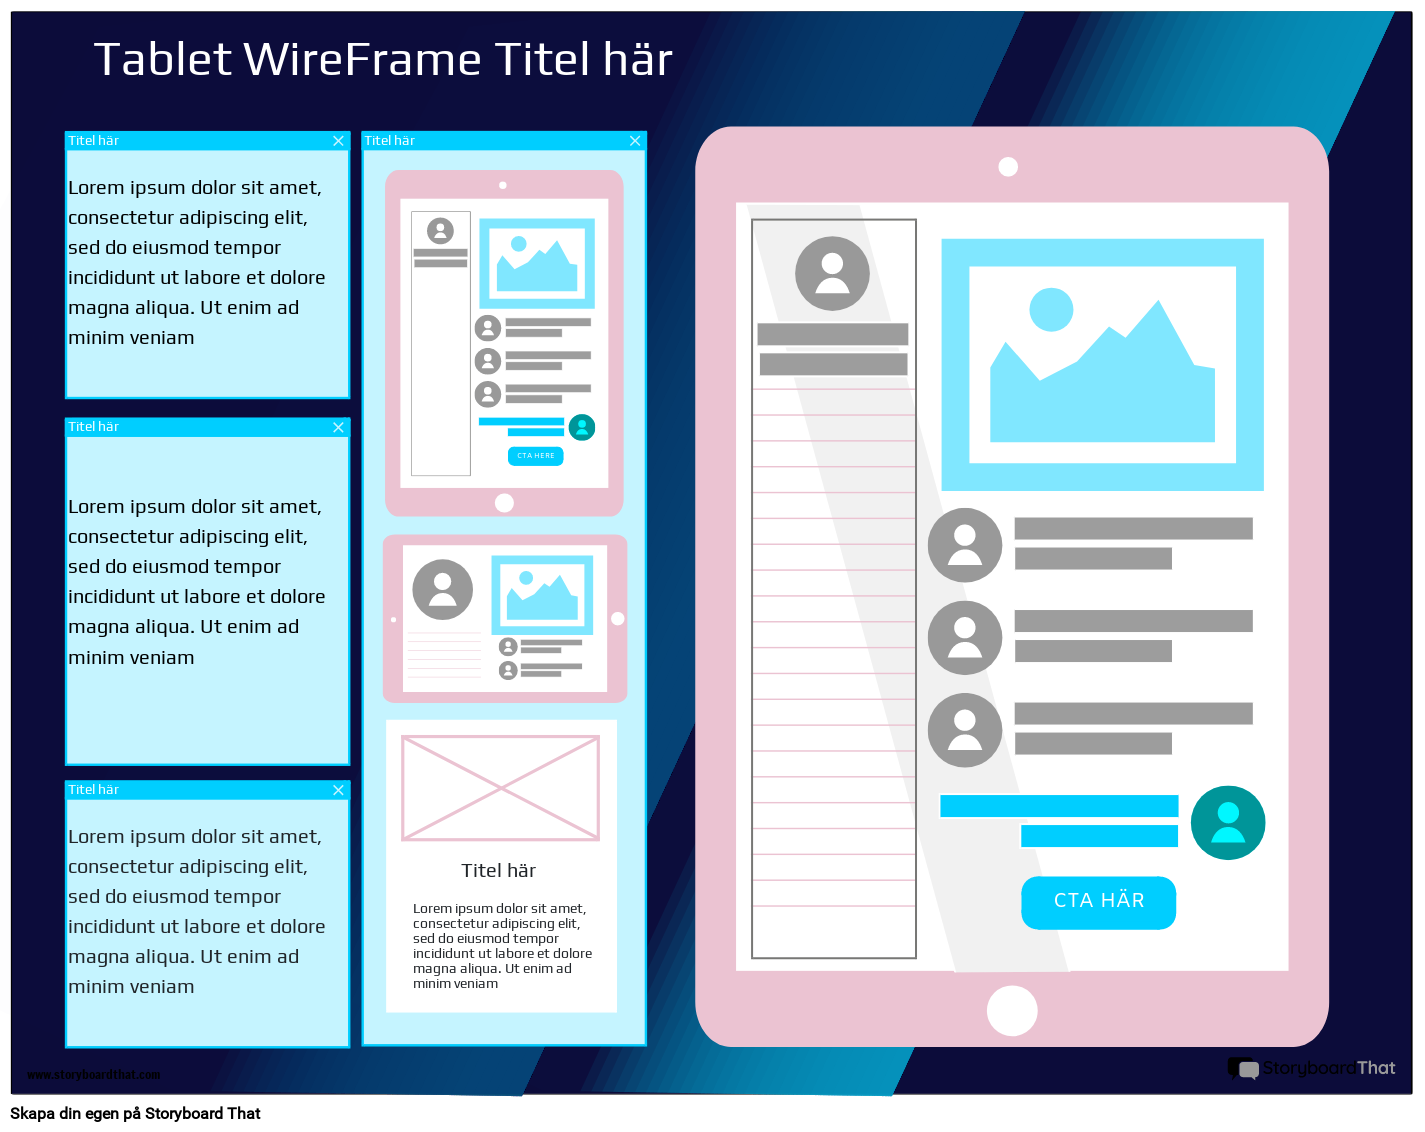 Corporate Tablet WireFrame Mall 1